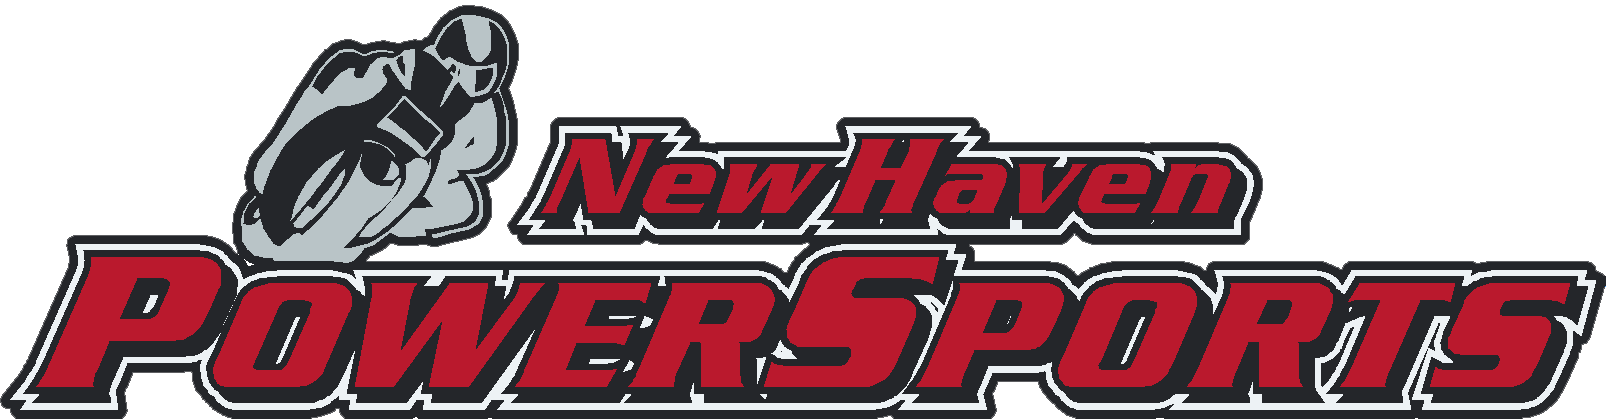 New Haven Powersports